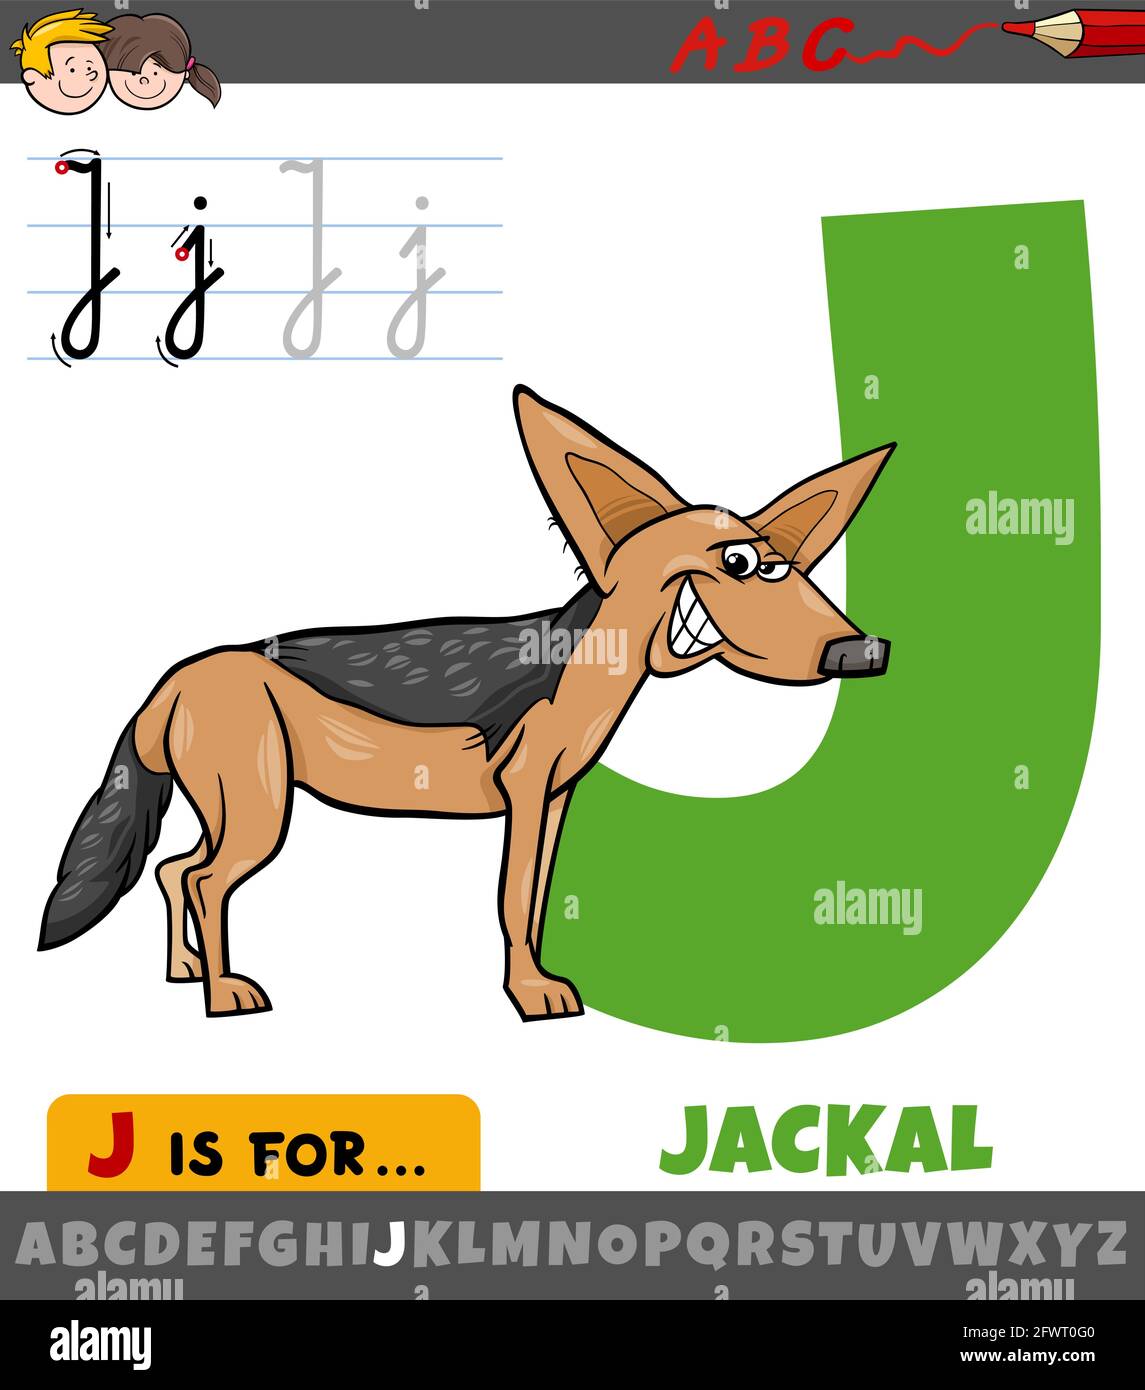 Educational cartoon illustration of letter J from alphabet with jackal animal character Stock Vector